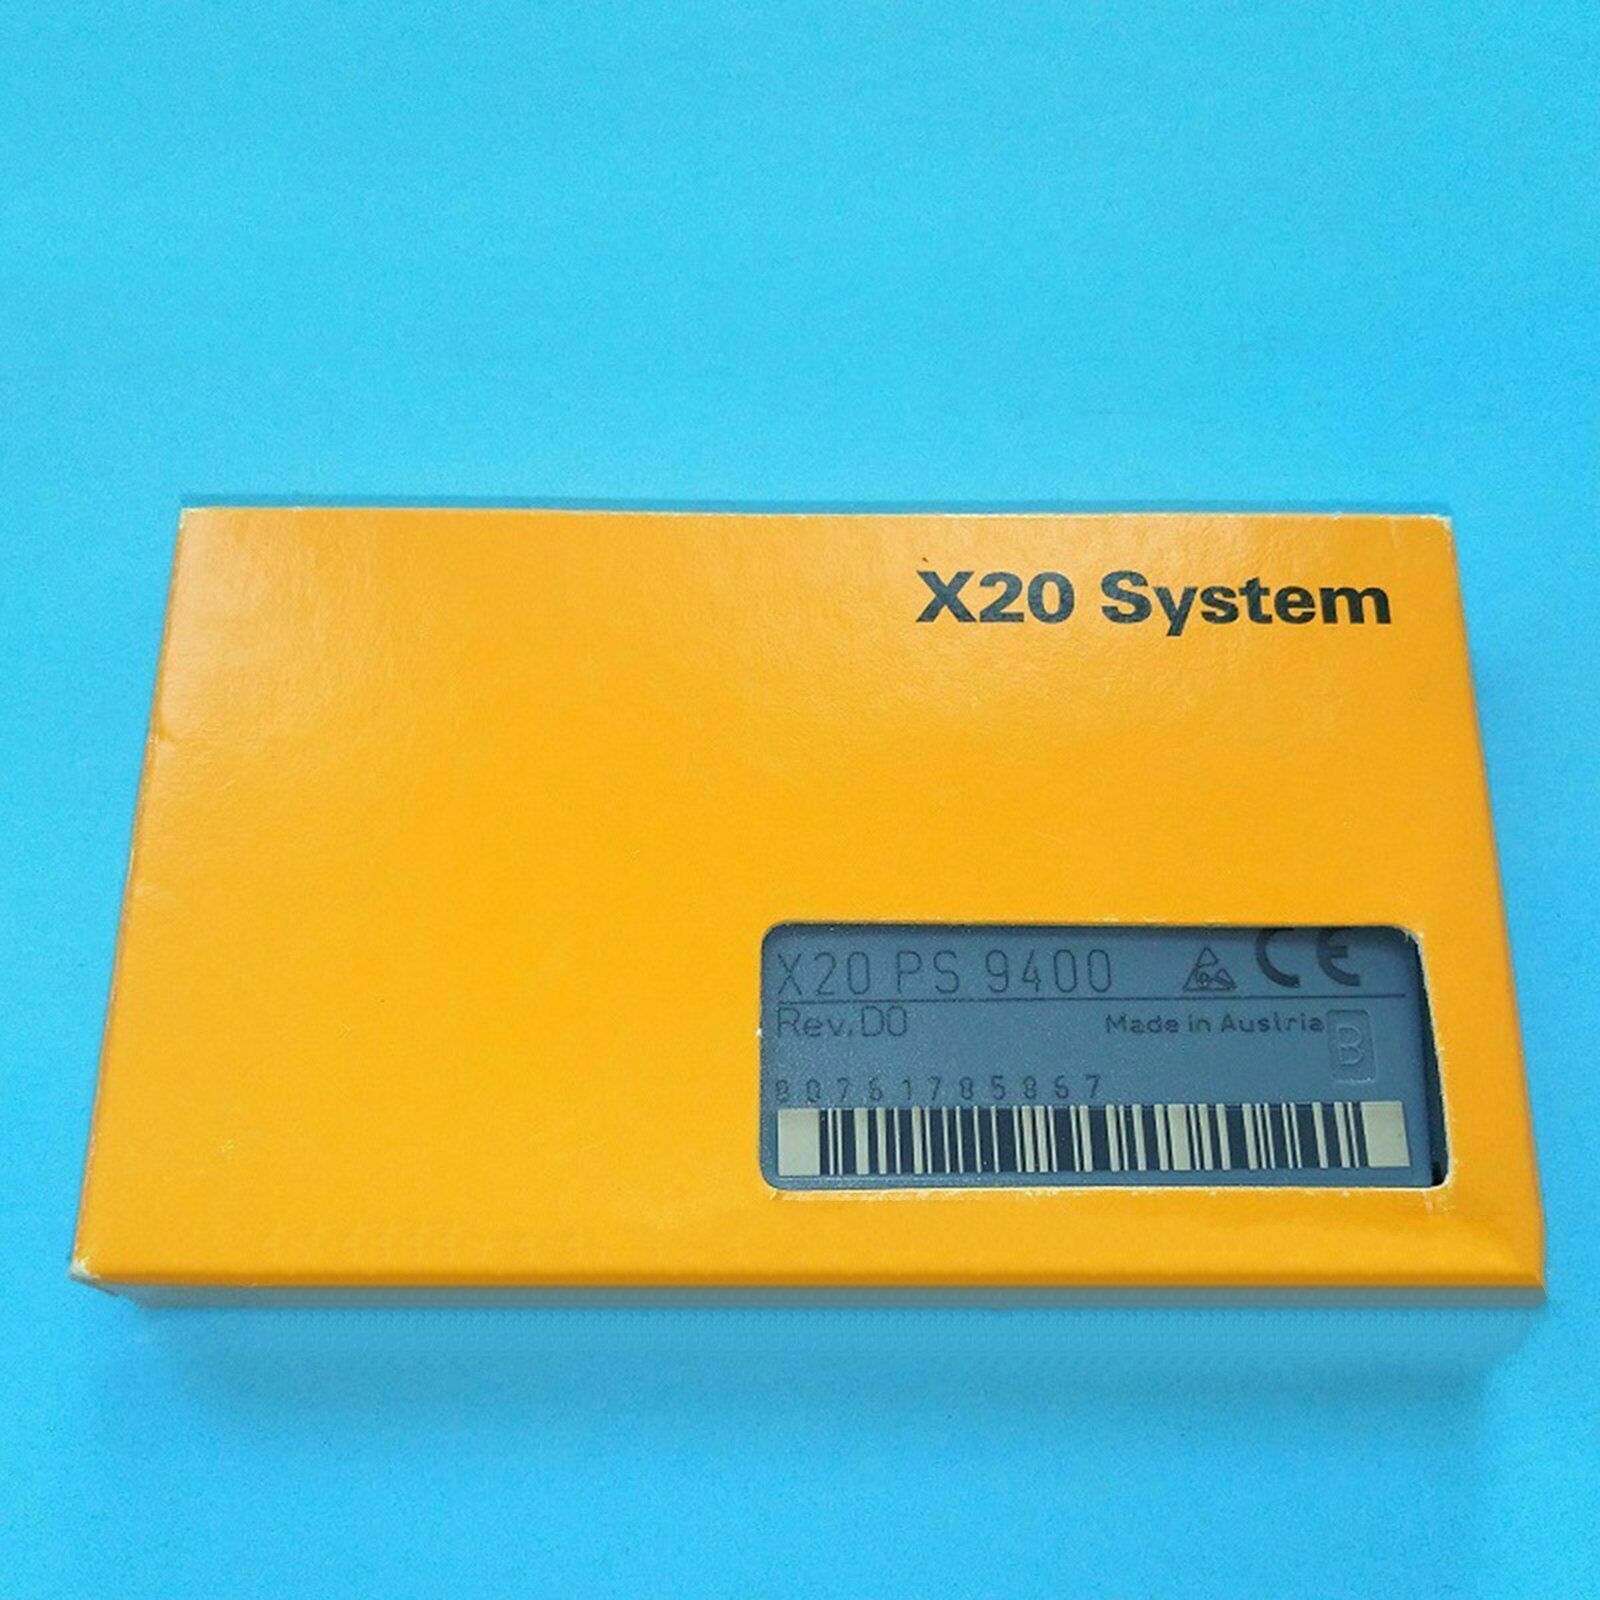 1PC NEW For B&R X20PS9400 module X20 PS 9400 In Box